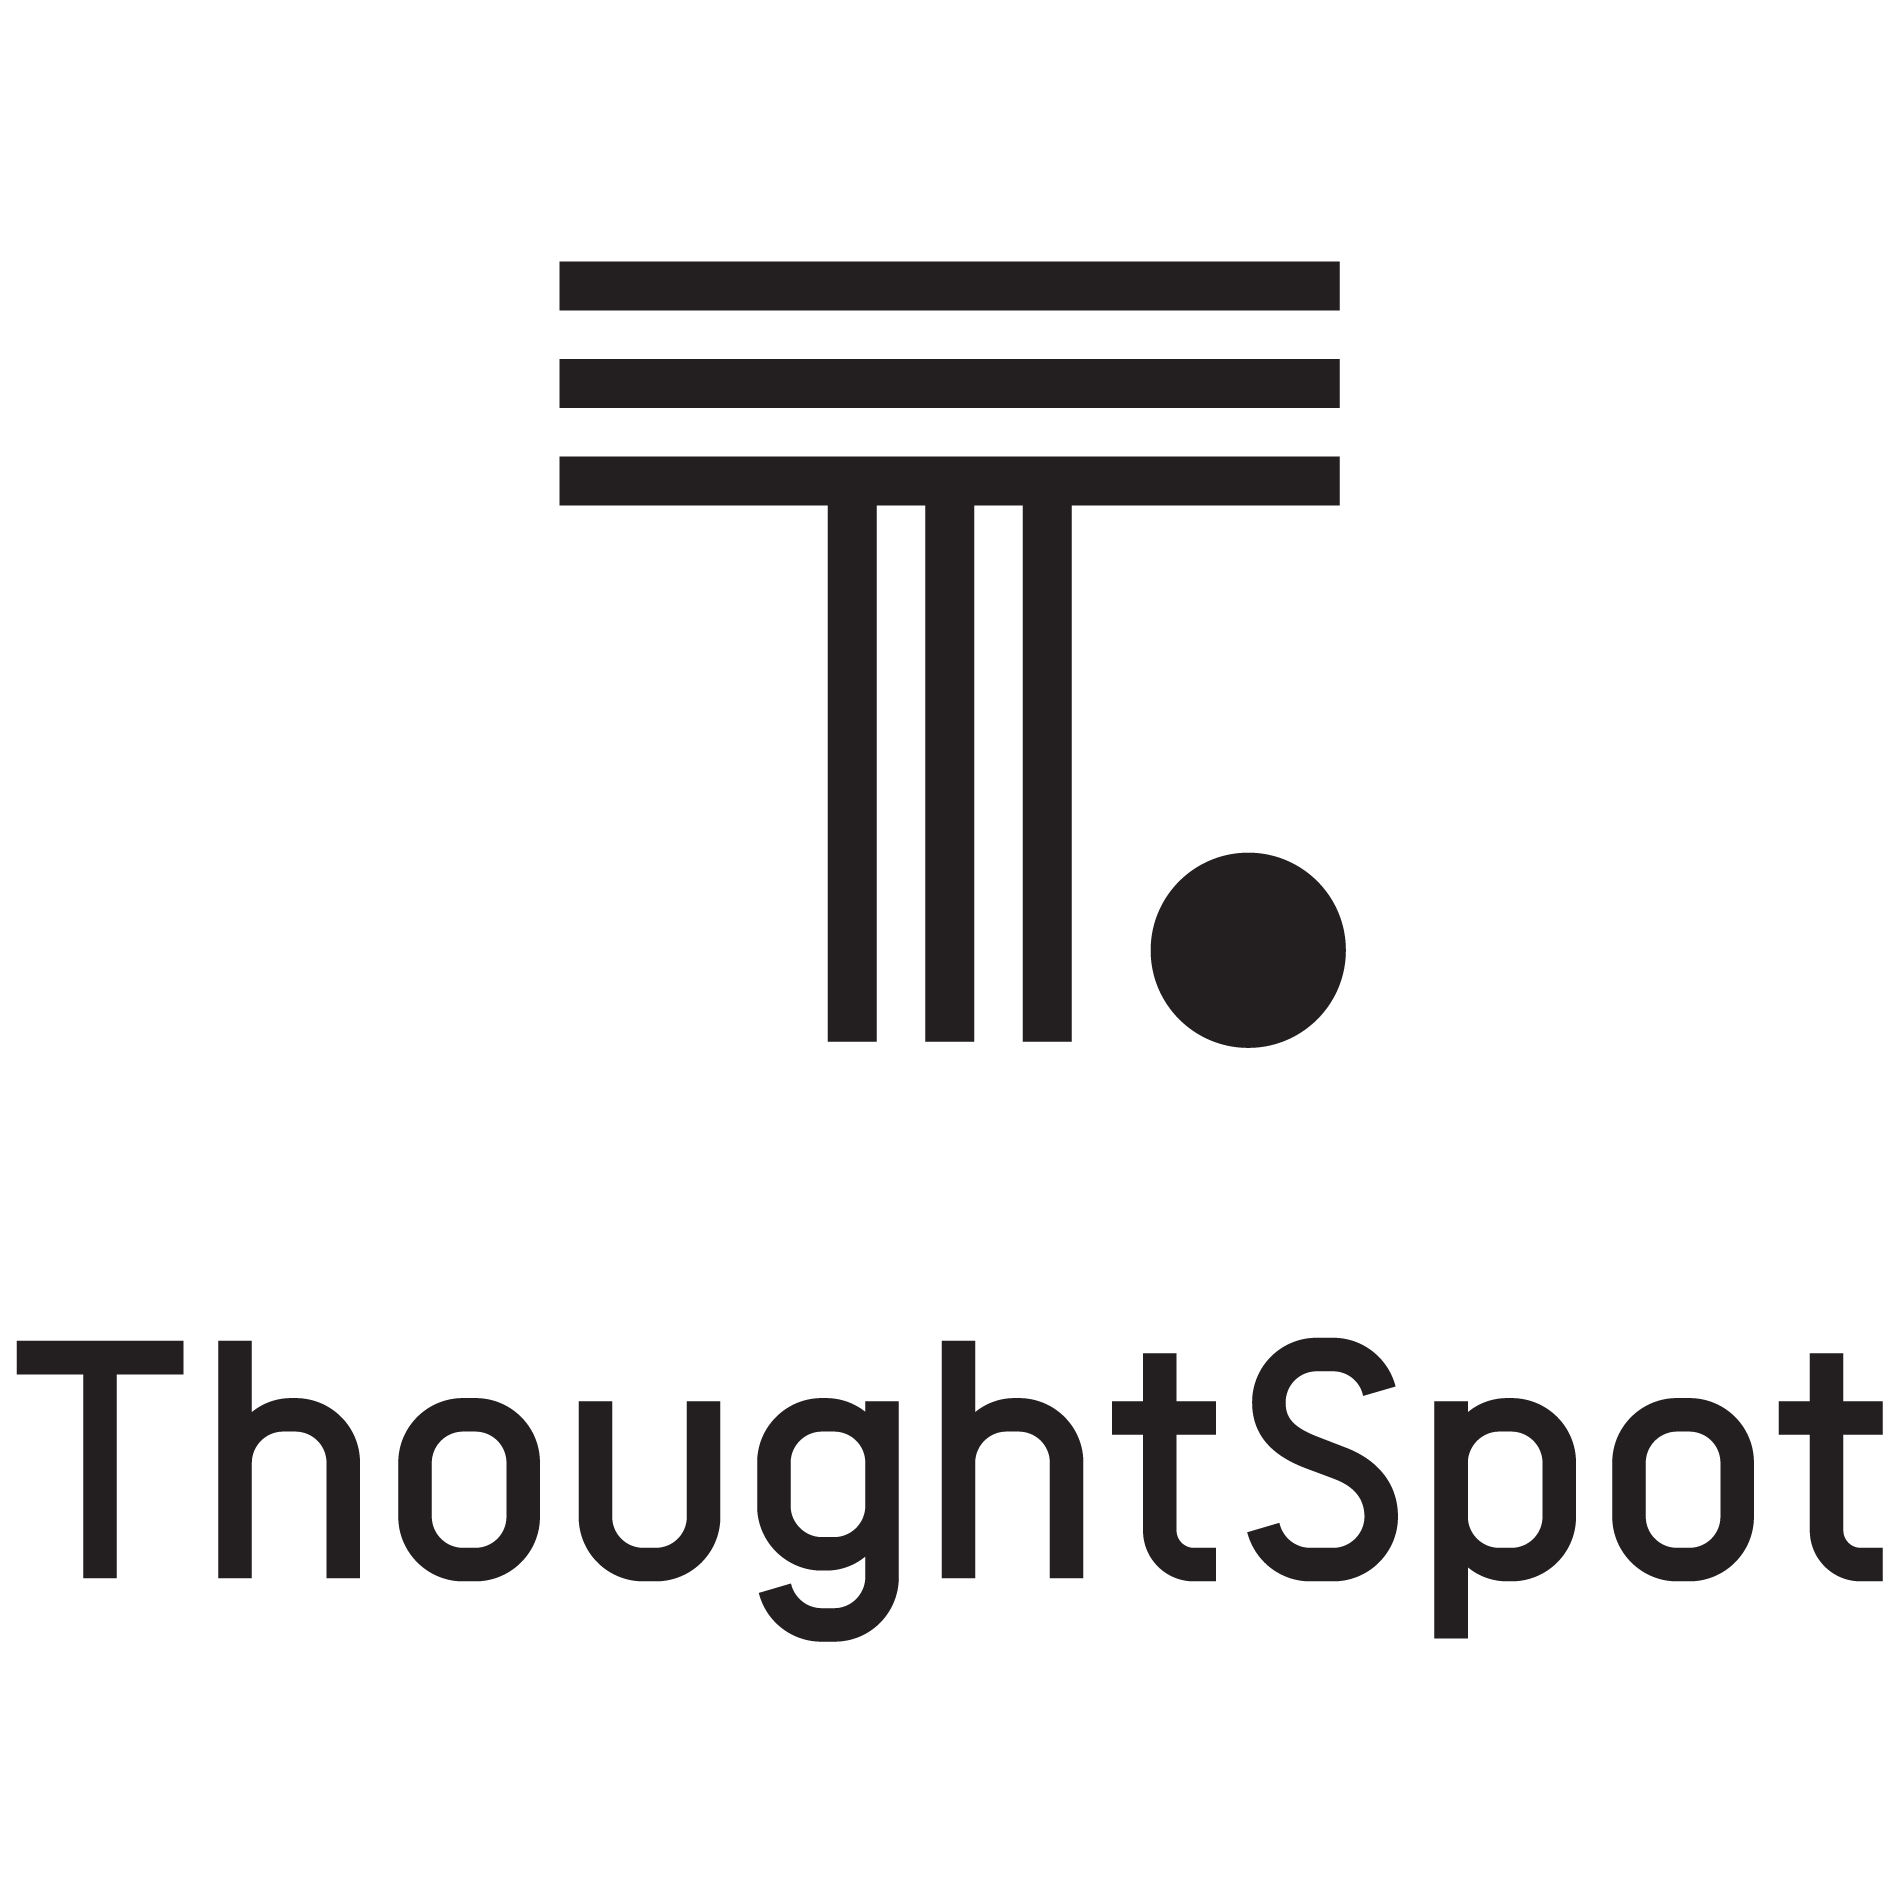 Thoughtspot-1